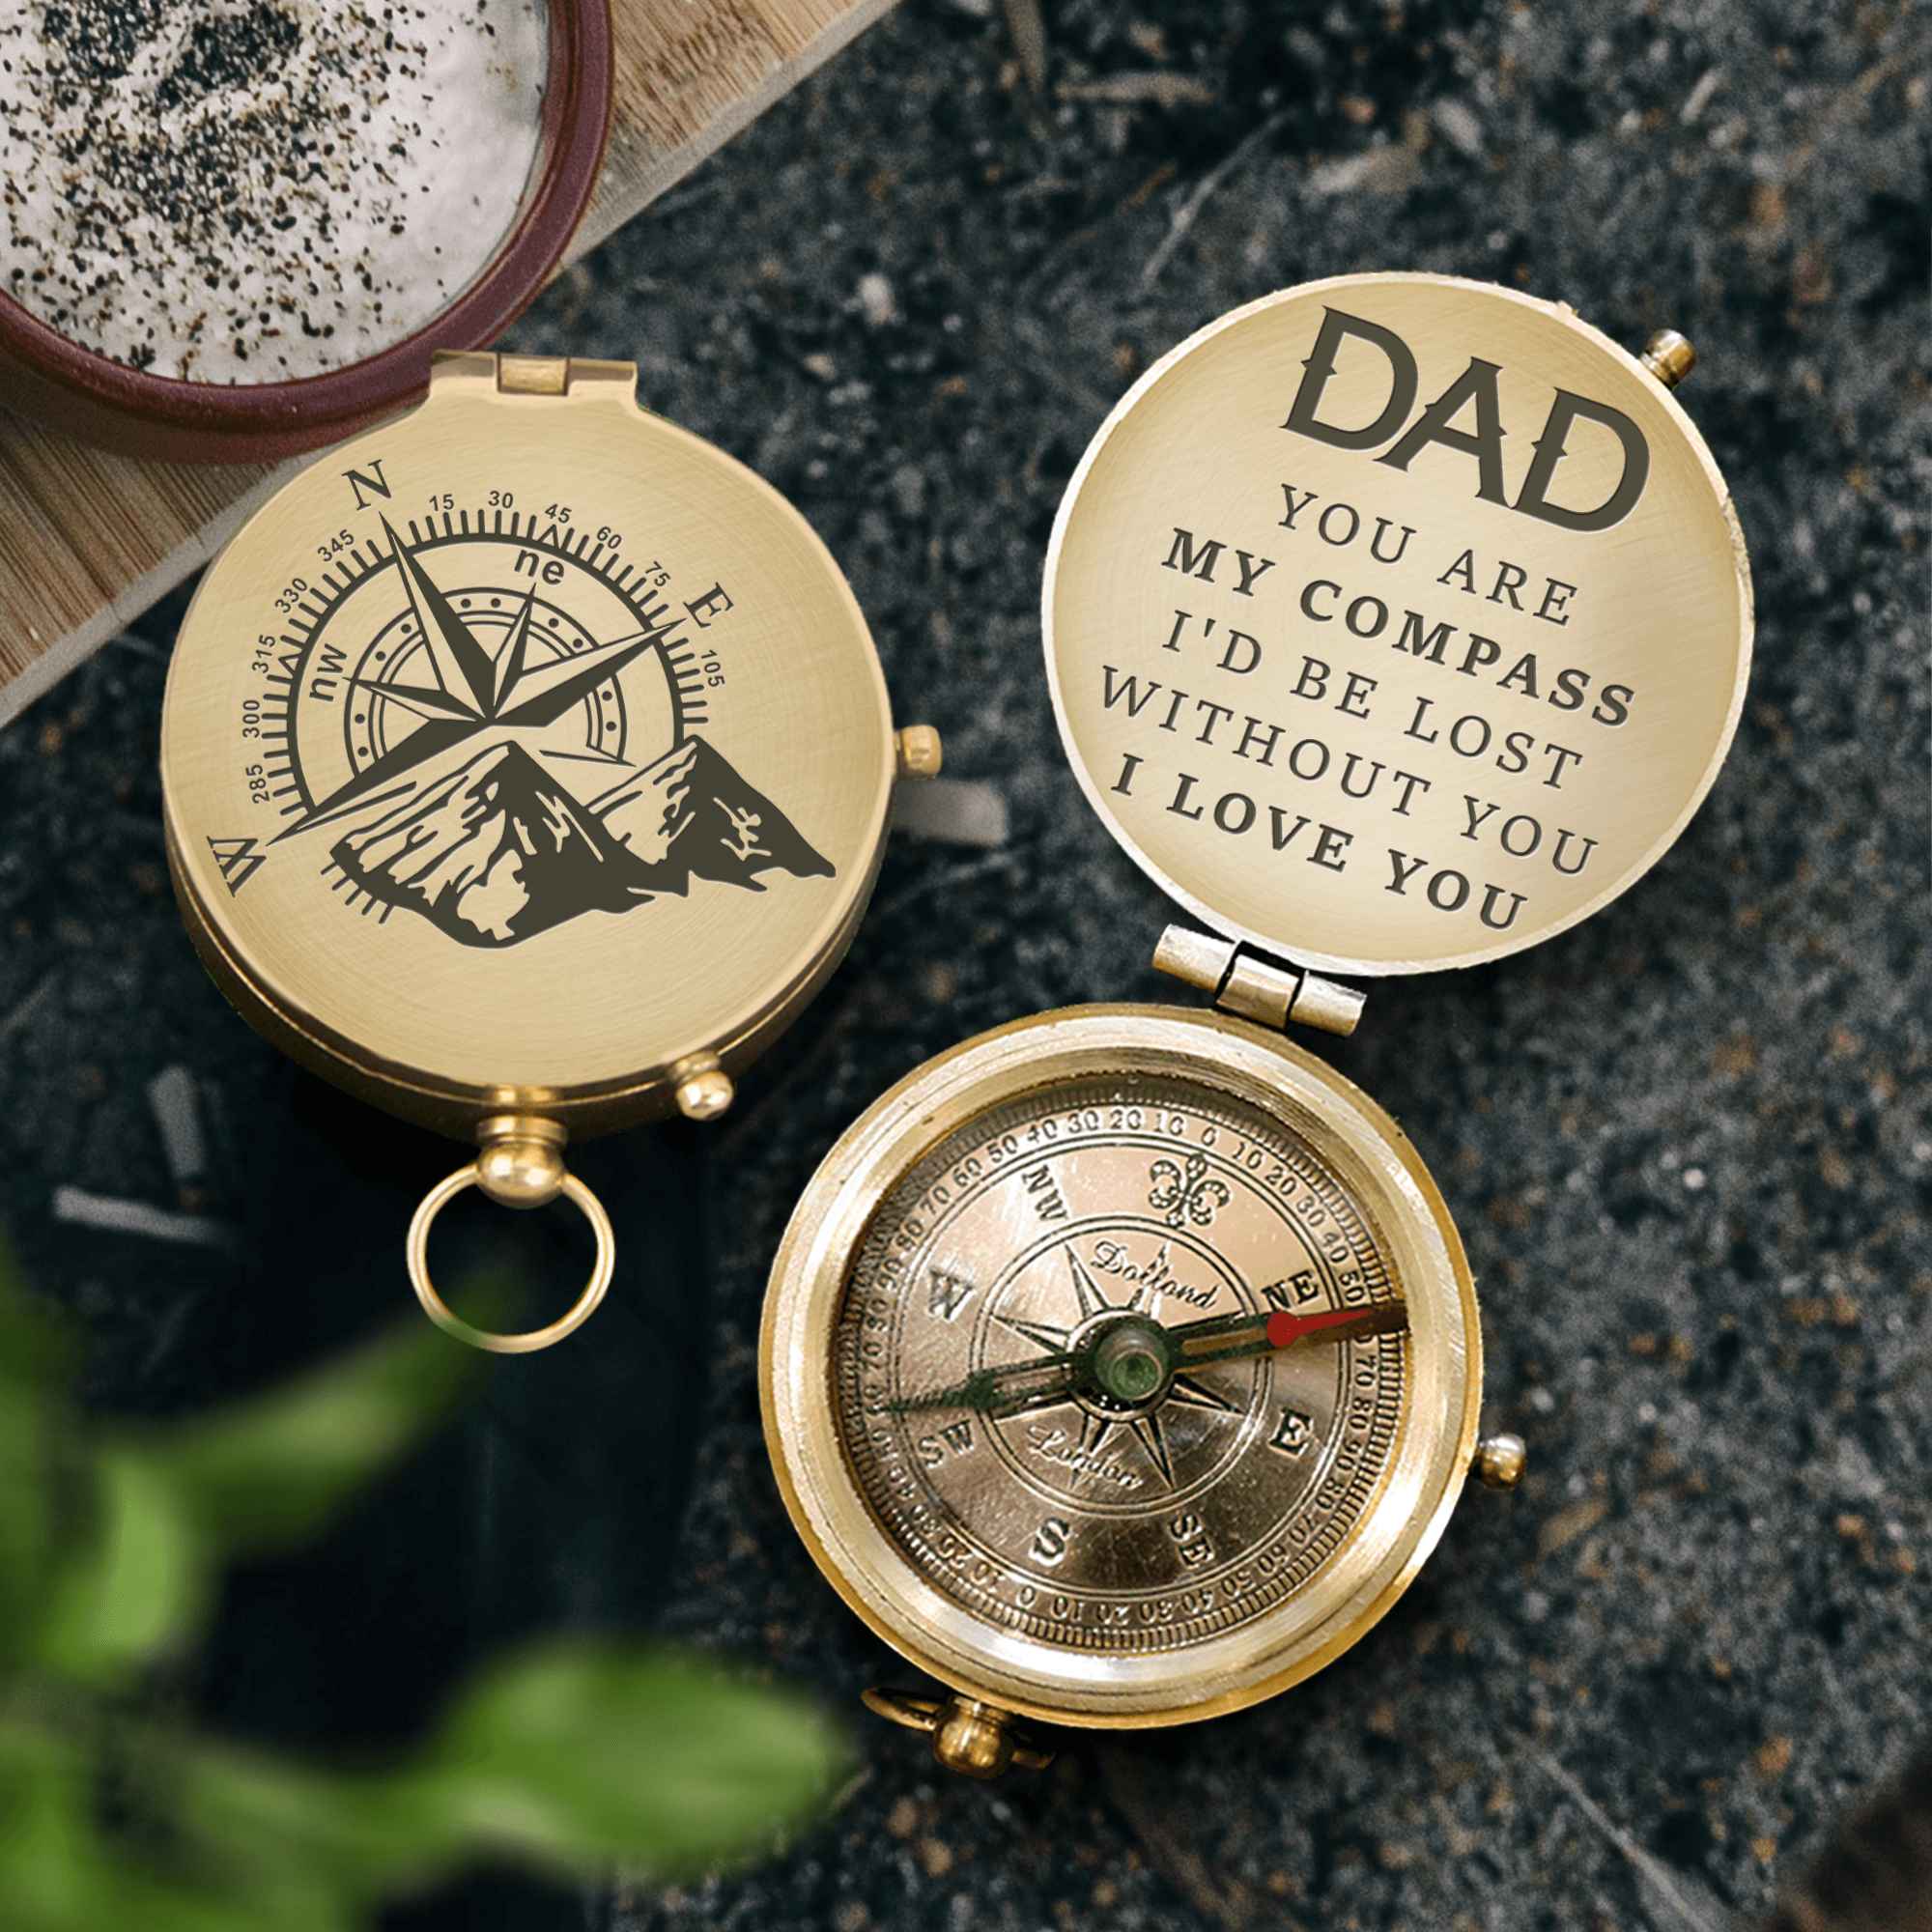 Engraved Compass - Hiking - To My Dad - I'd Be Lost Without You - Augpb18012 - Gifts Holder